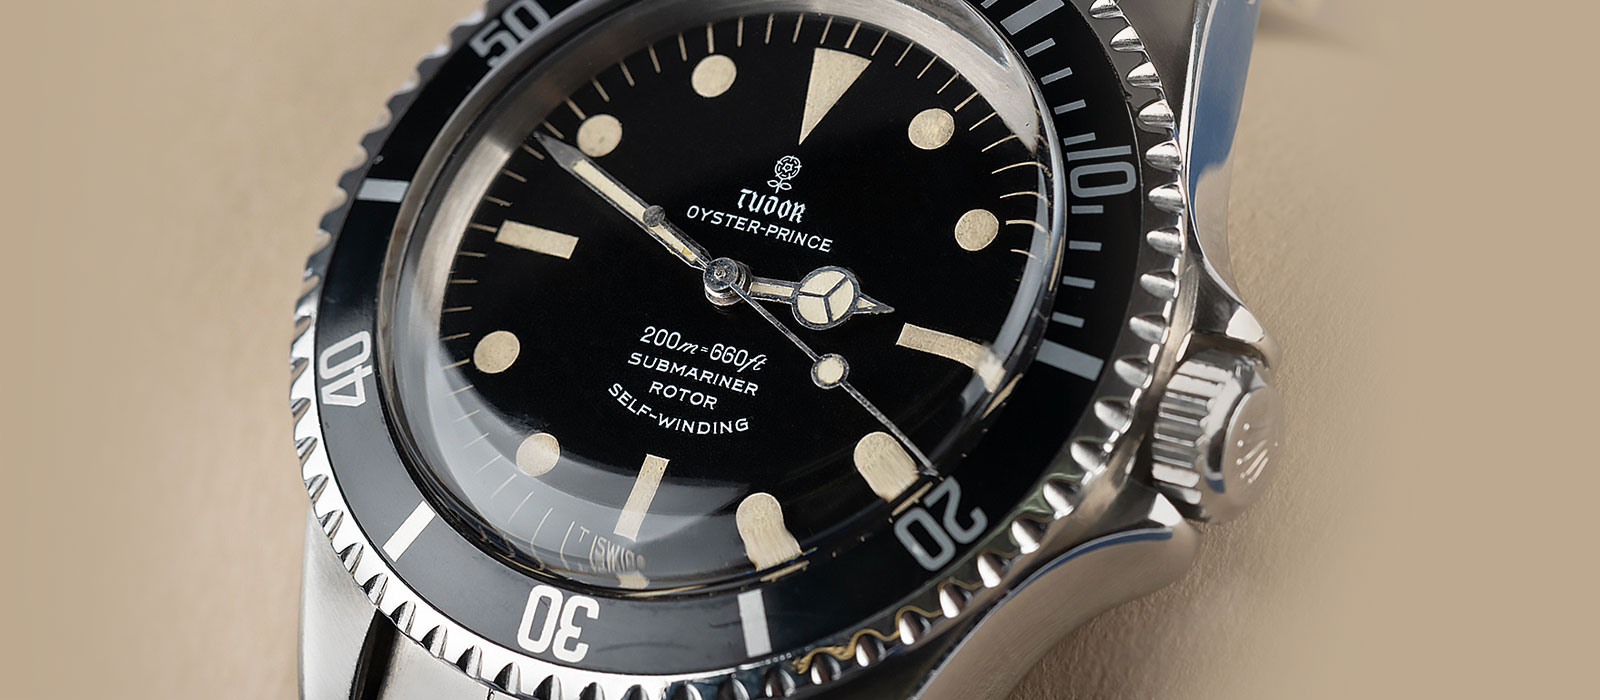 Date Your Tudor Watch By Serial Number - EmmyWatch